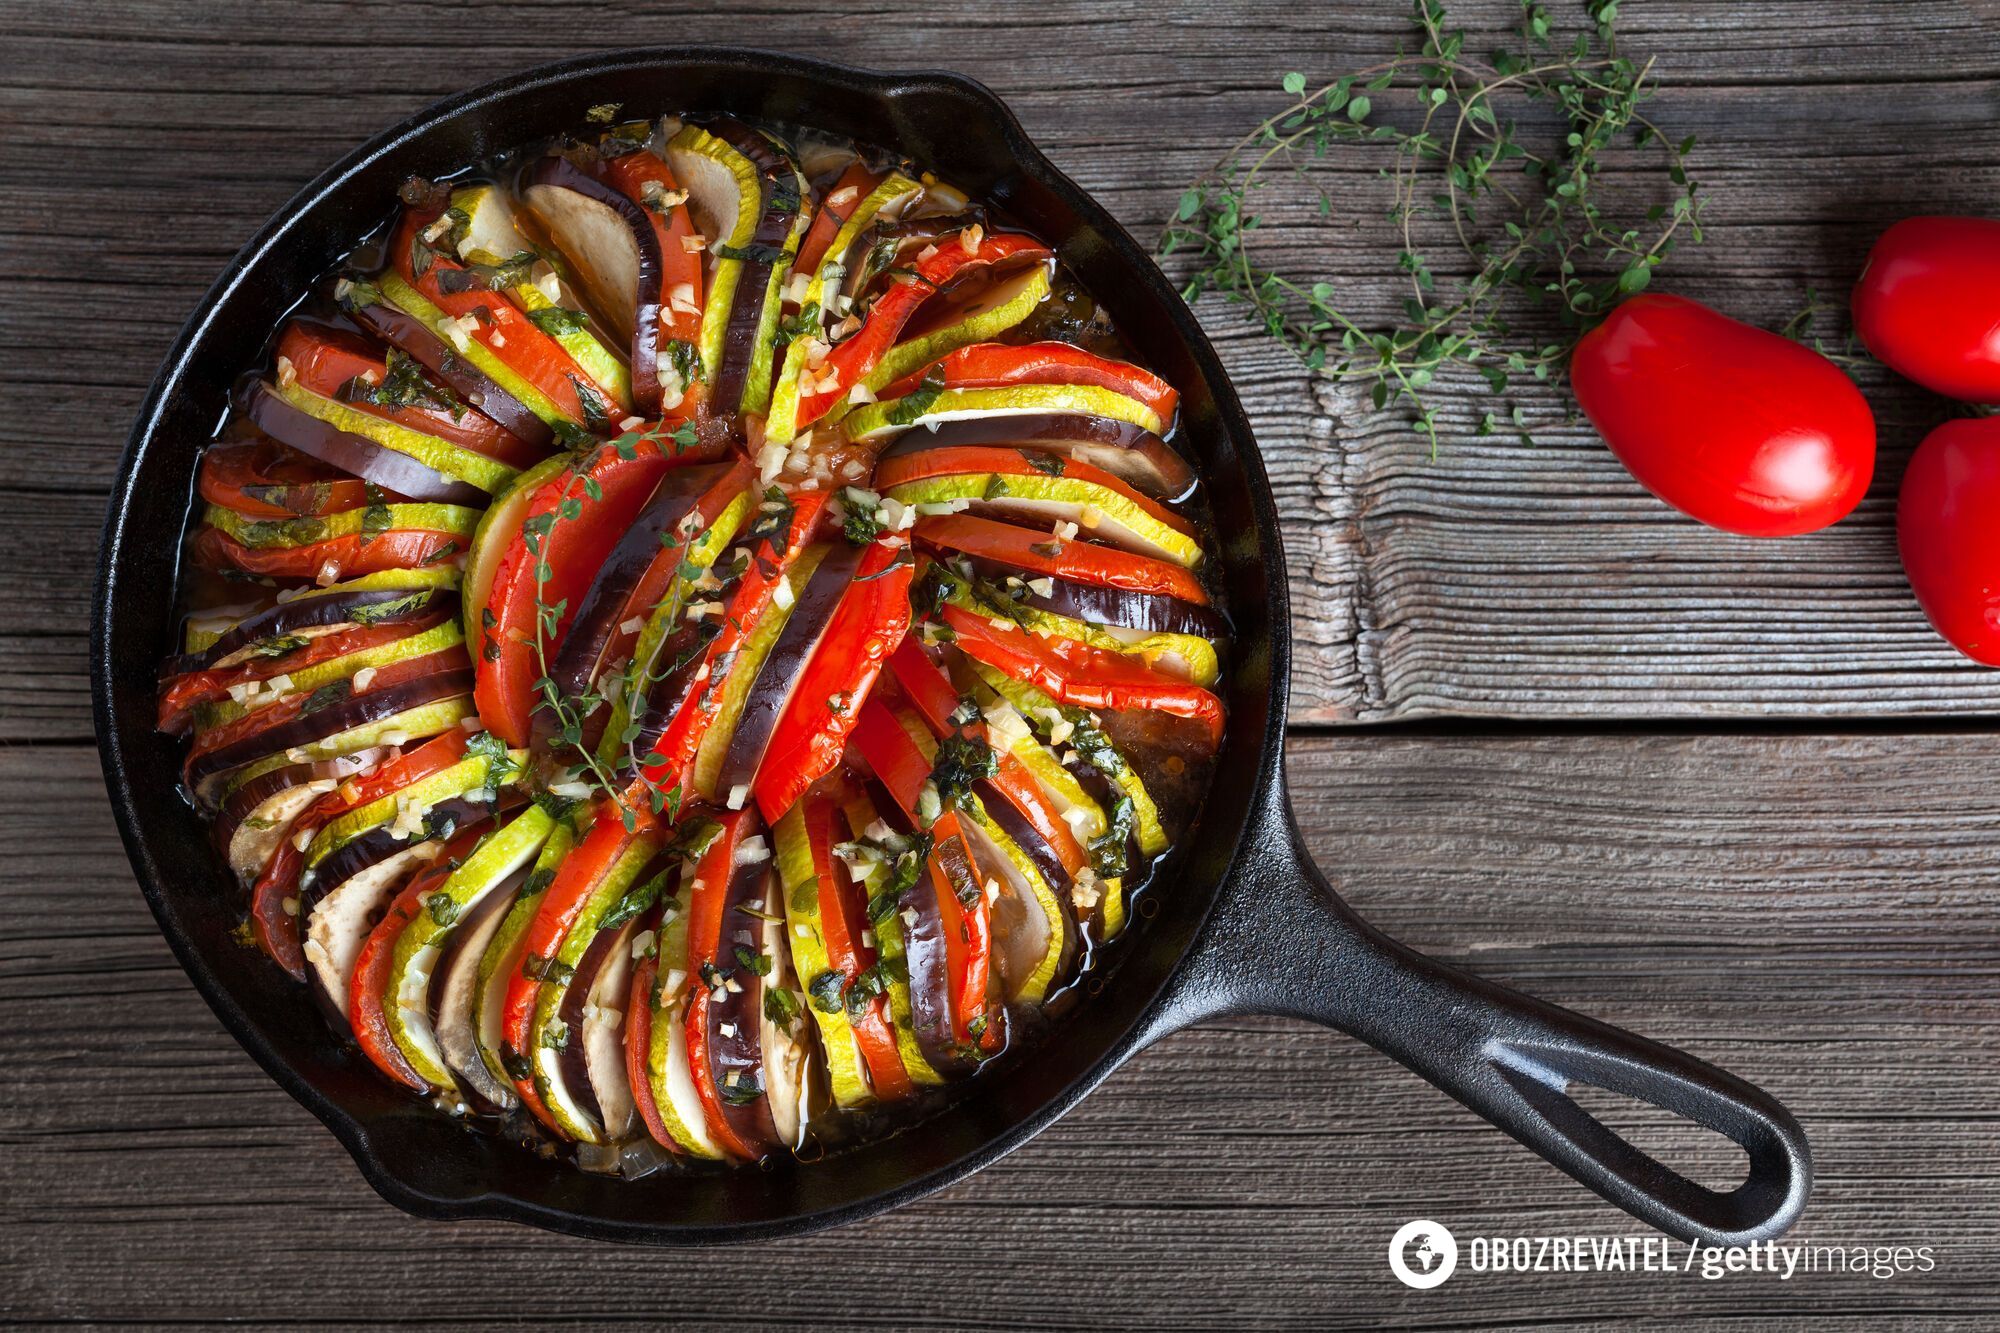 Ratatouille with minced meat and vegetables